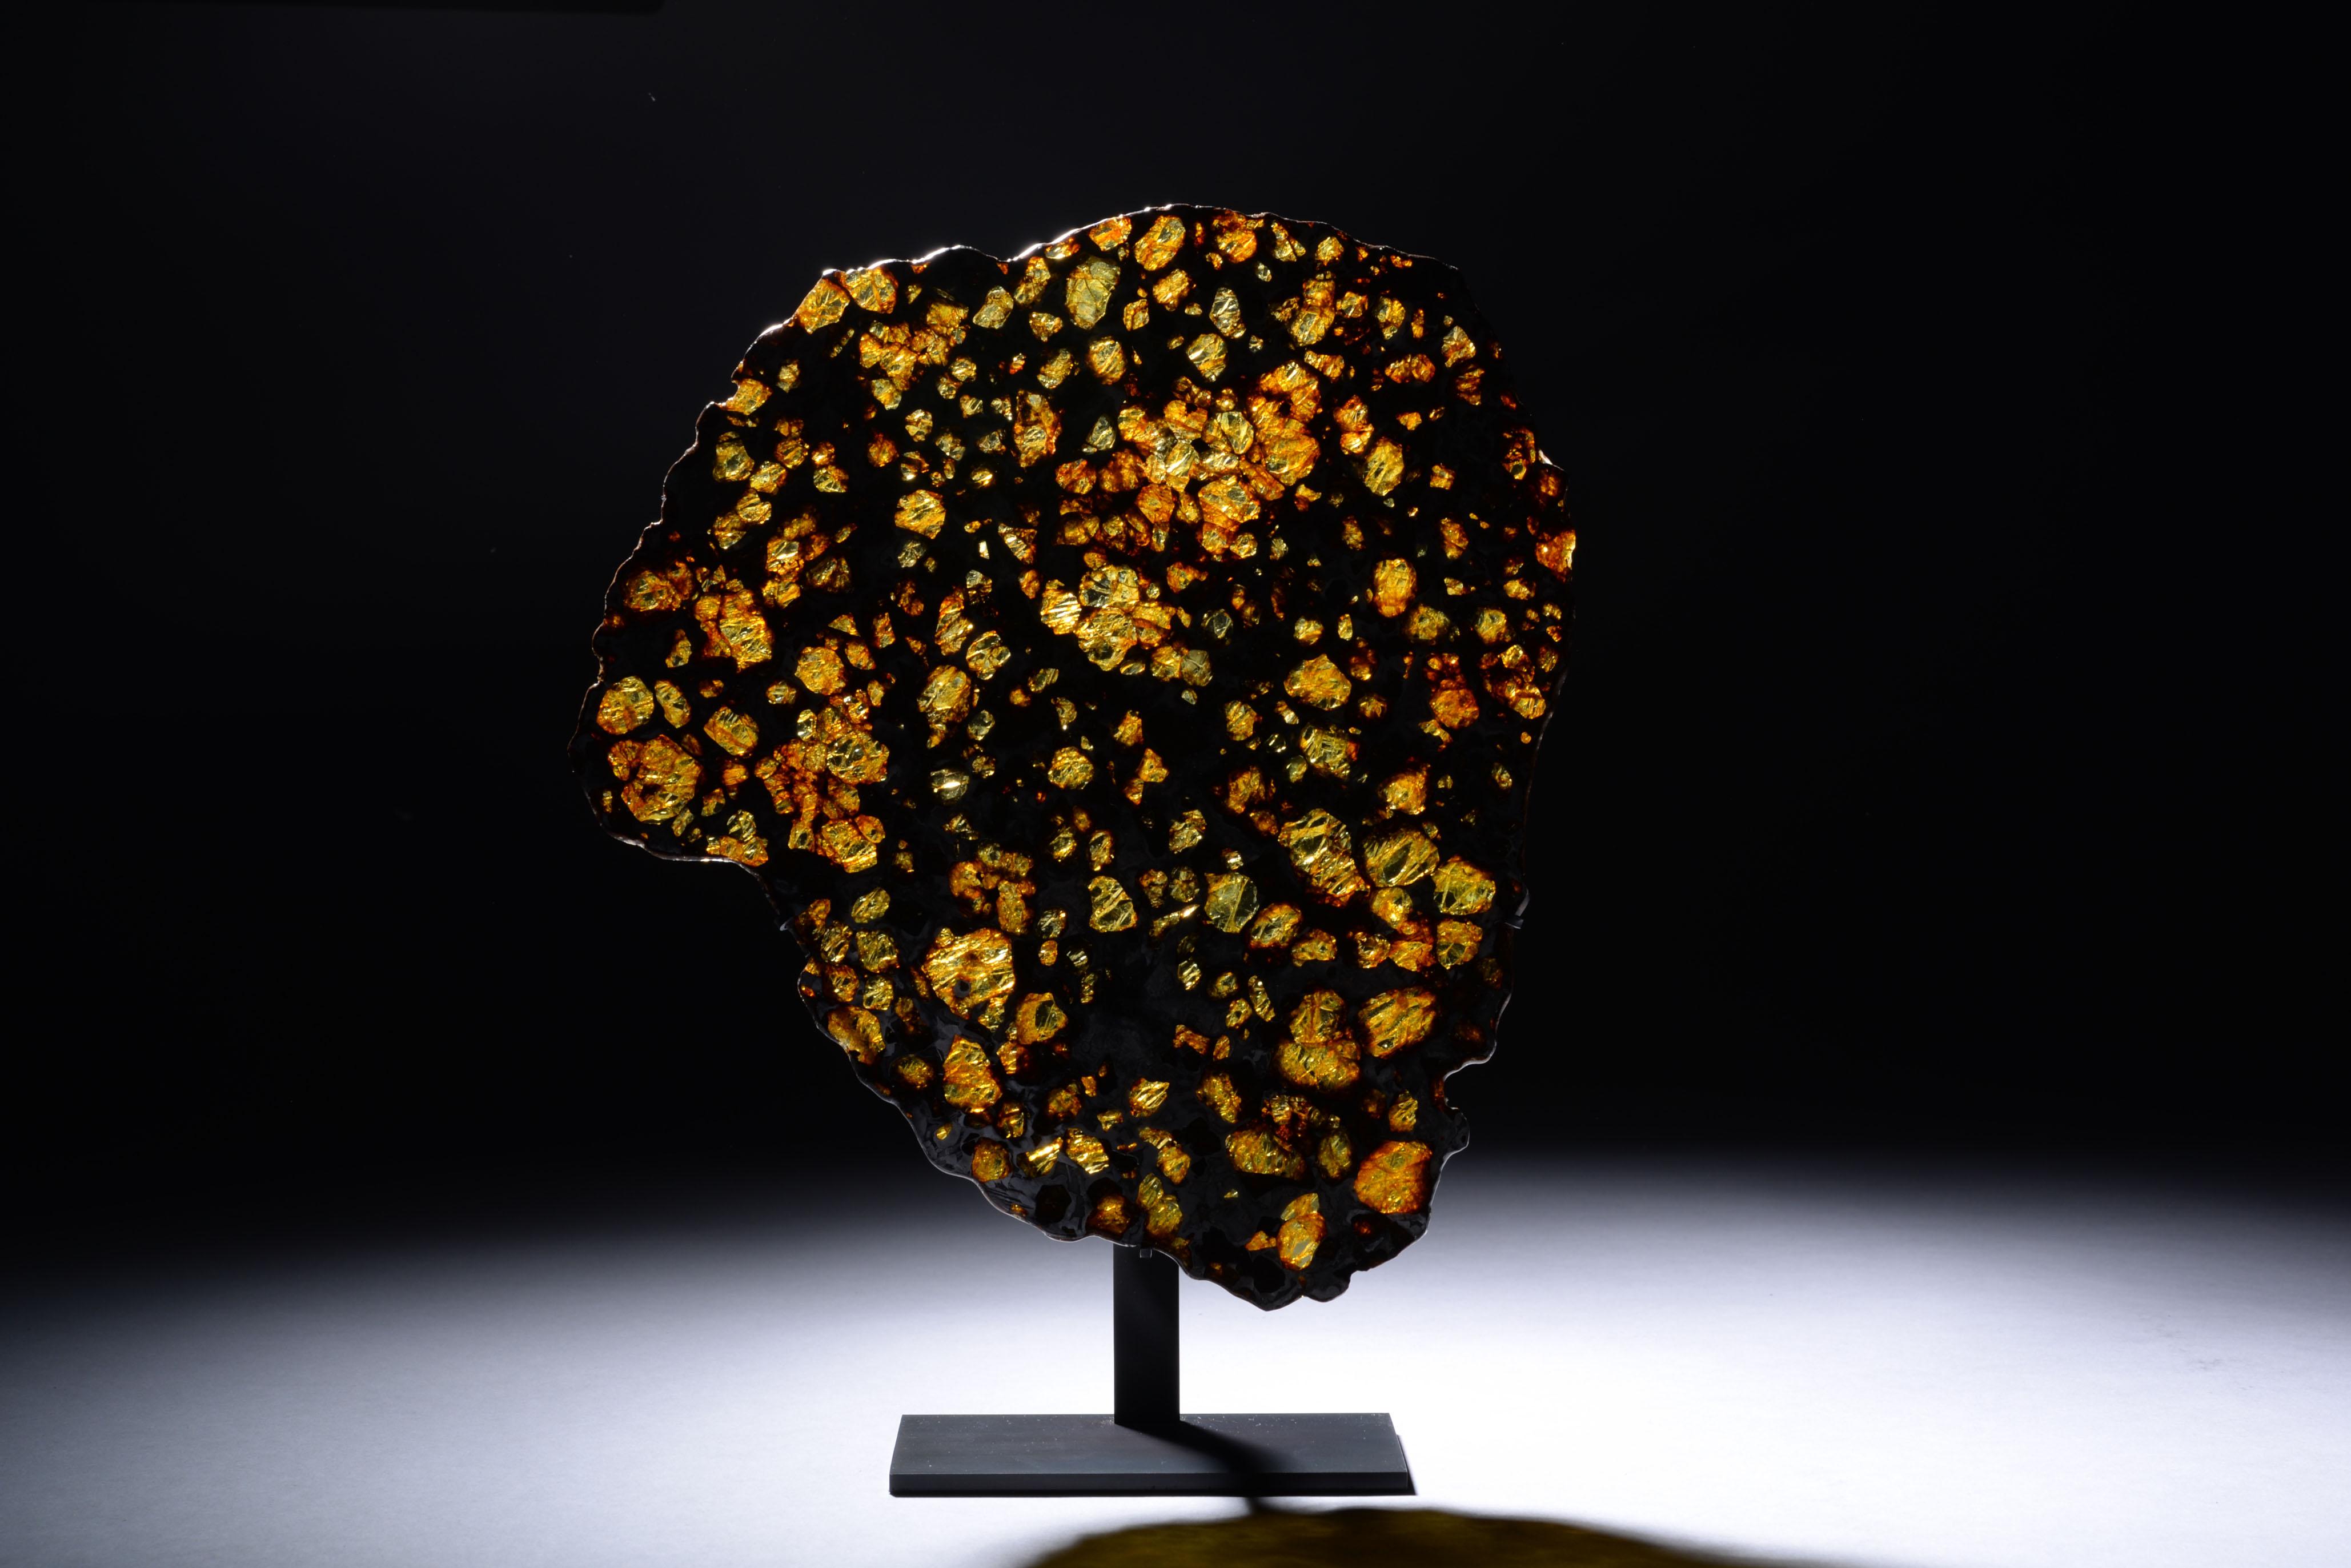 “This 282 g interior section of the Imilac pallasite shows a large range of olivine grain sizes – there are coarse grains, grain clusters and fine-grained, crushed olivine debris. All of the olivine grains are surrounded by a matrix of metallic